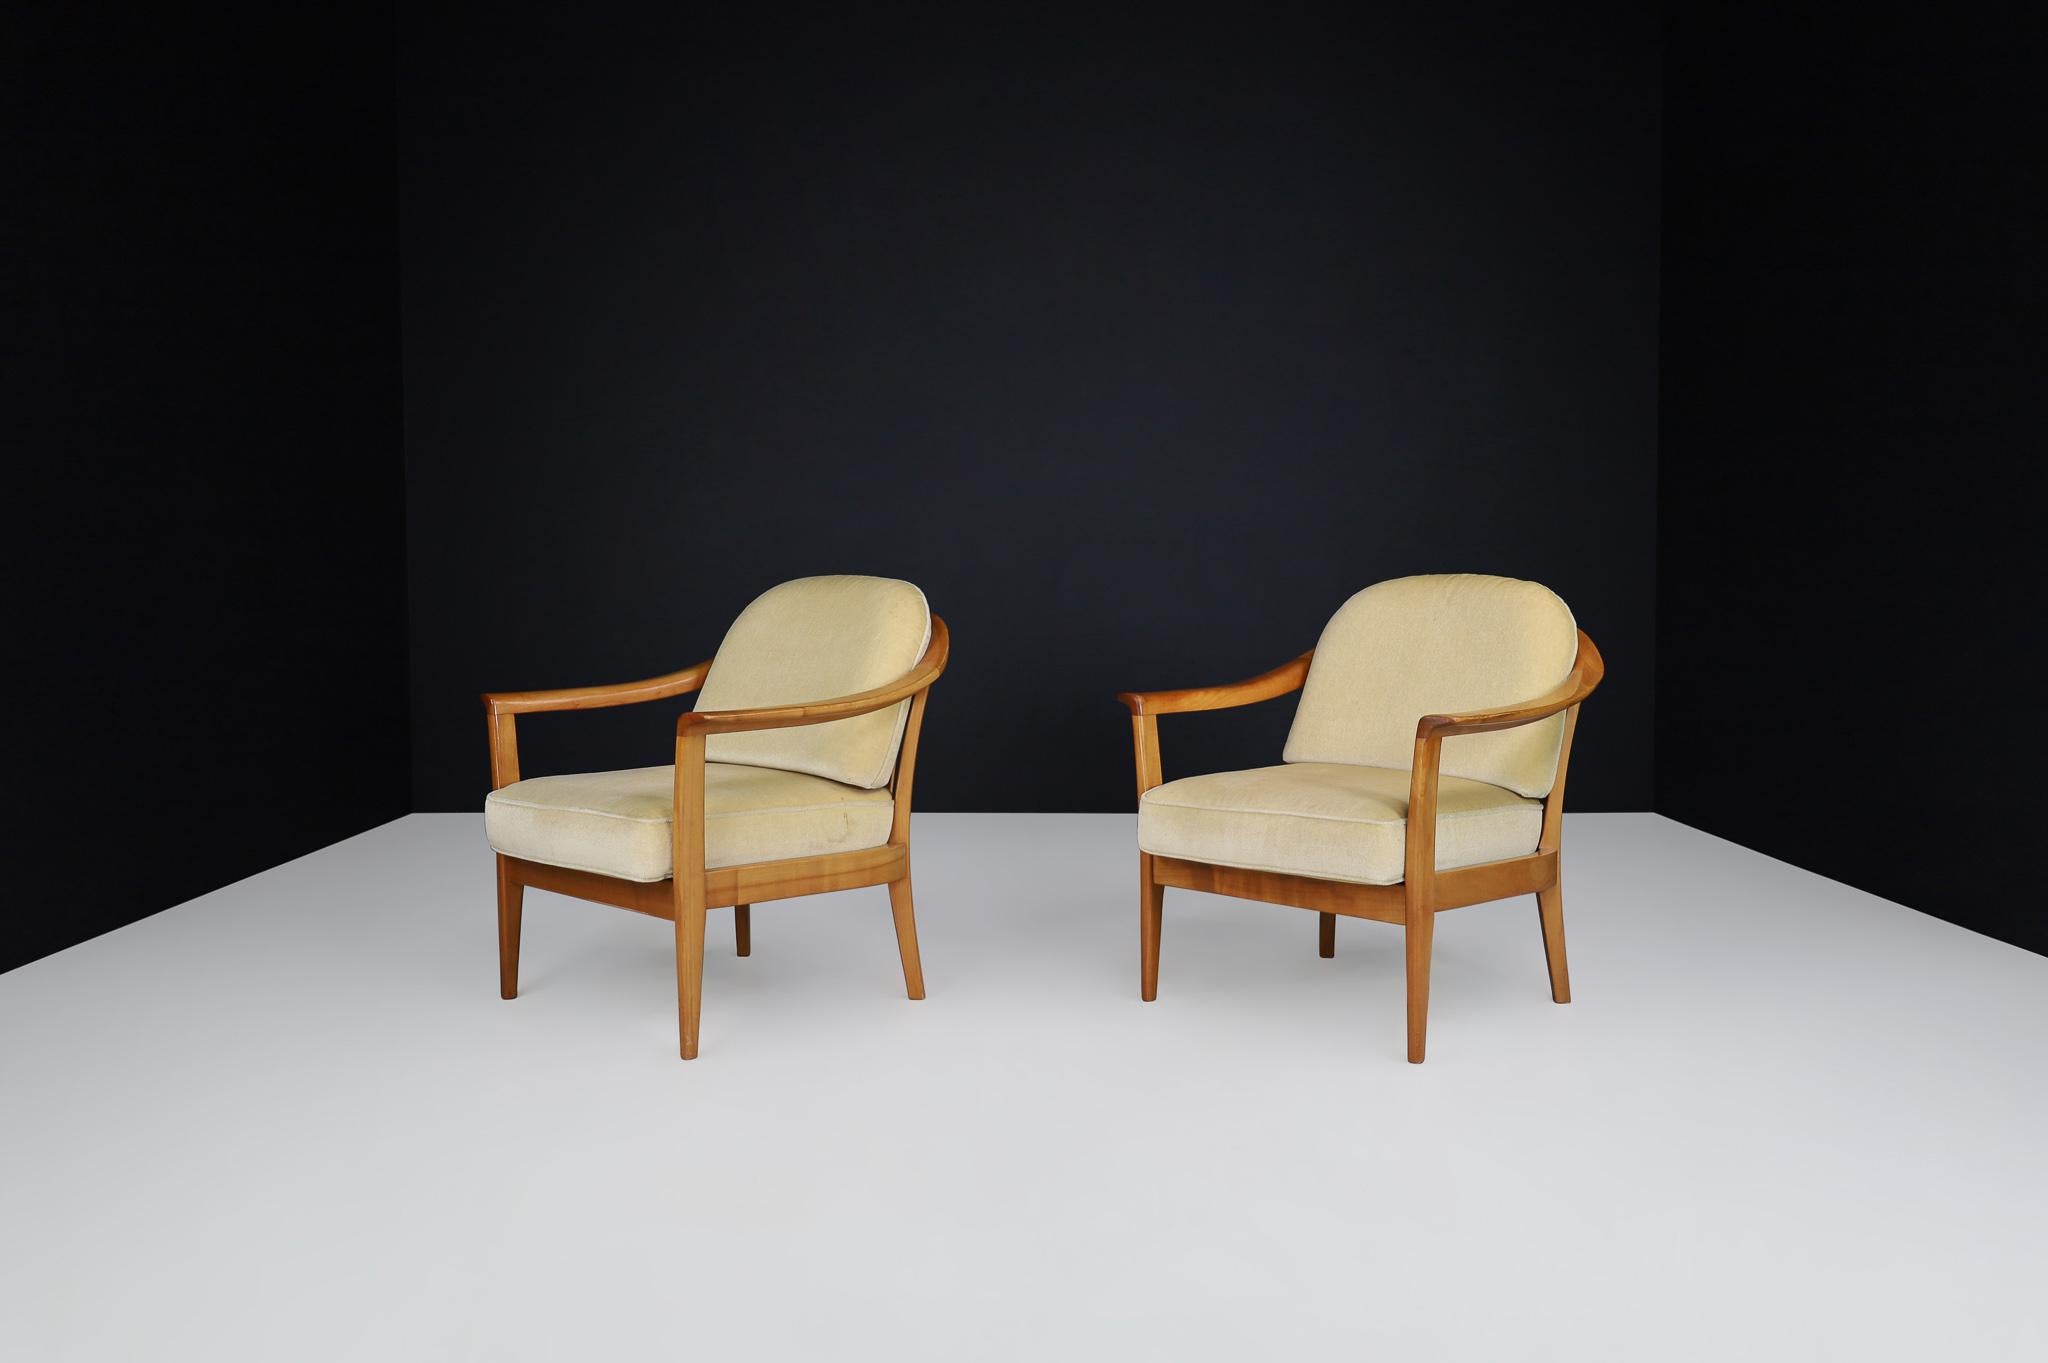 20th Century Wilhelm Knol Easy Chairs In Cherry and Original Upholstery, Germany 1960s For Sale